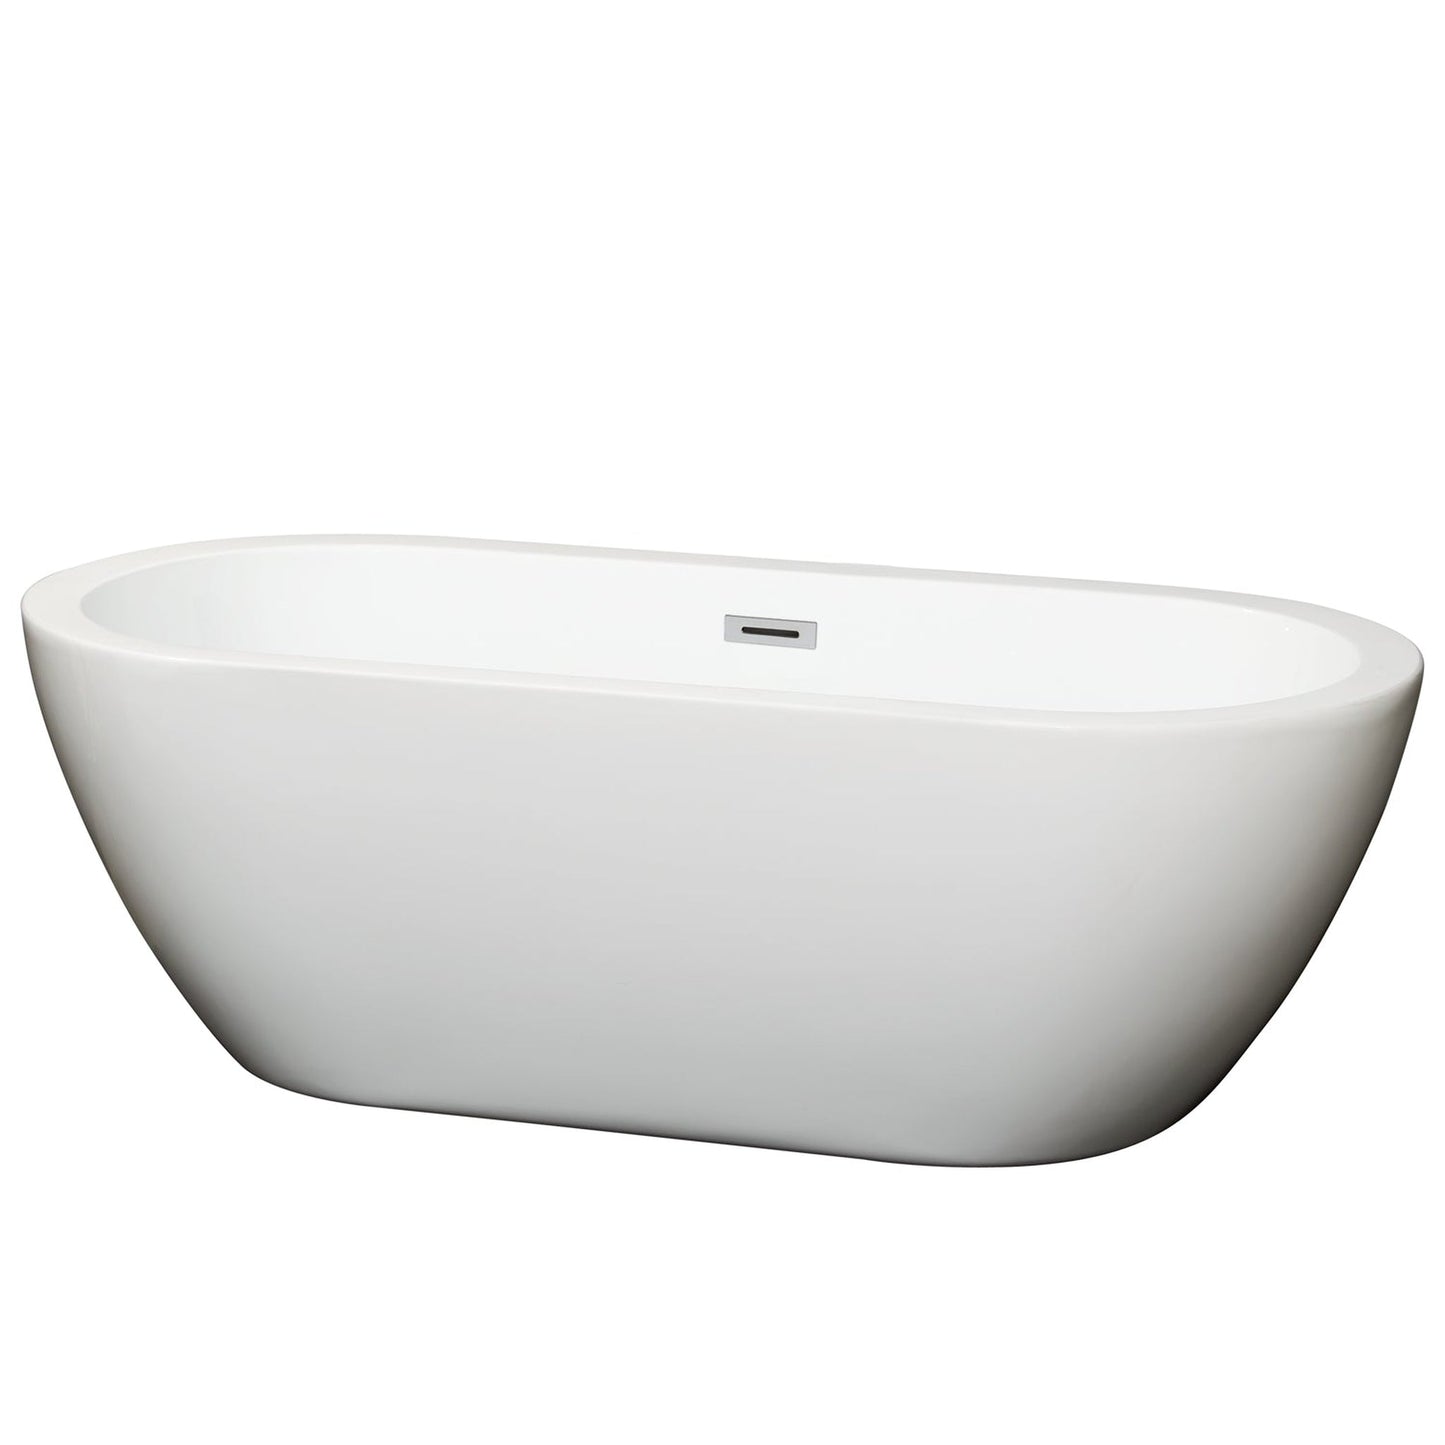 Wyndham Collection Soho 68" Freestanding Bathtub in White With Polished Chrome Drain and Overflow Trim